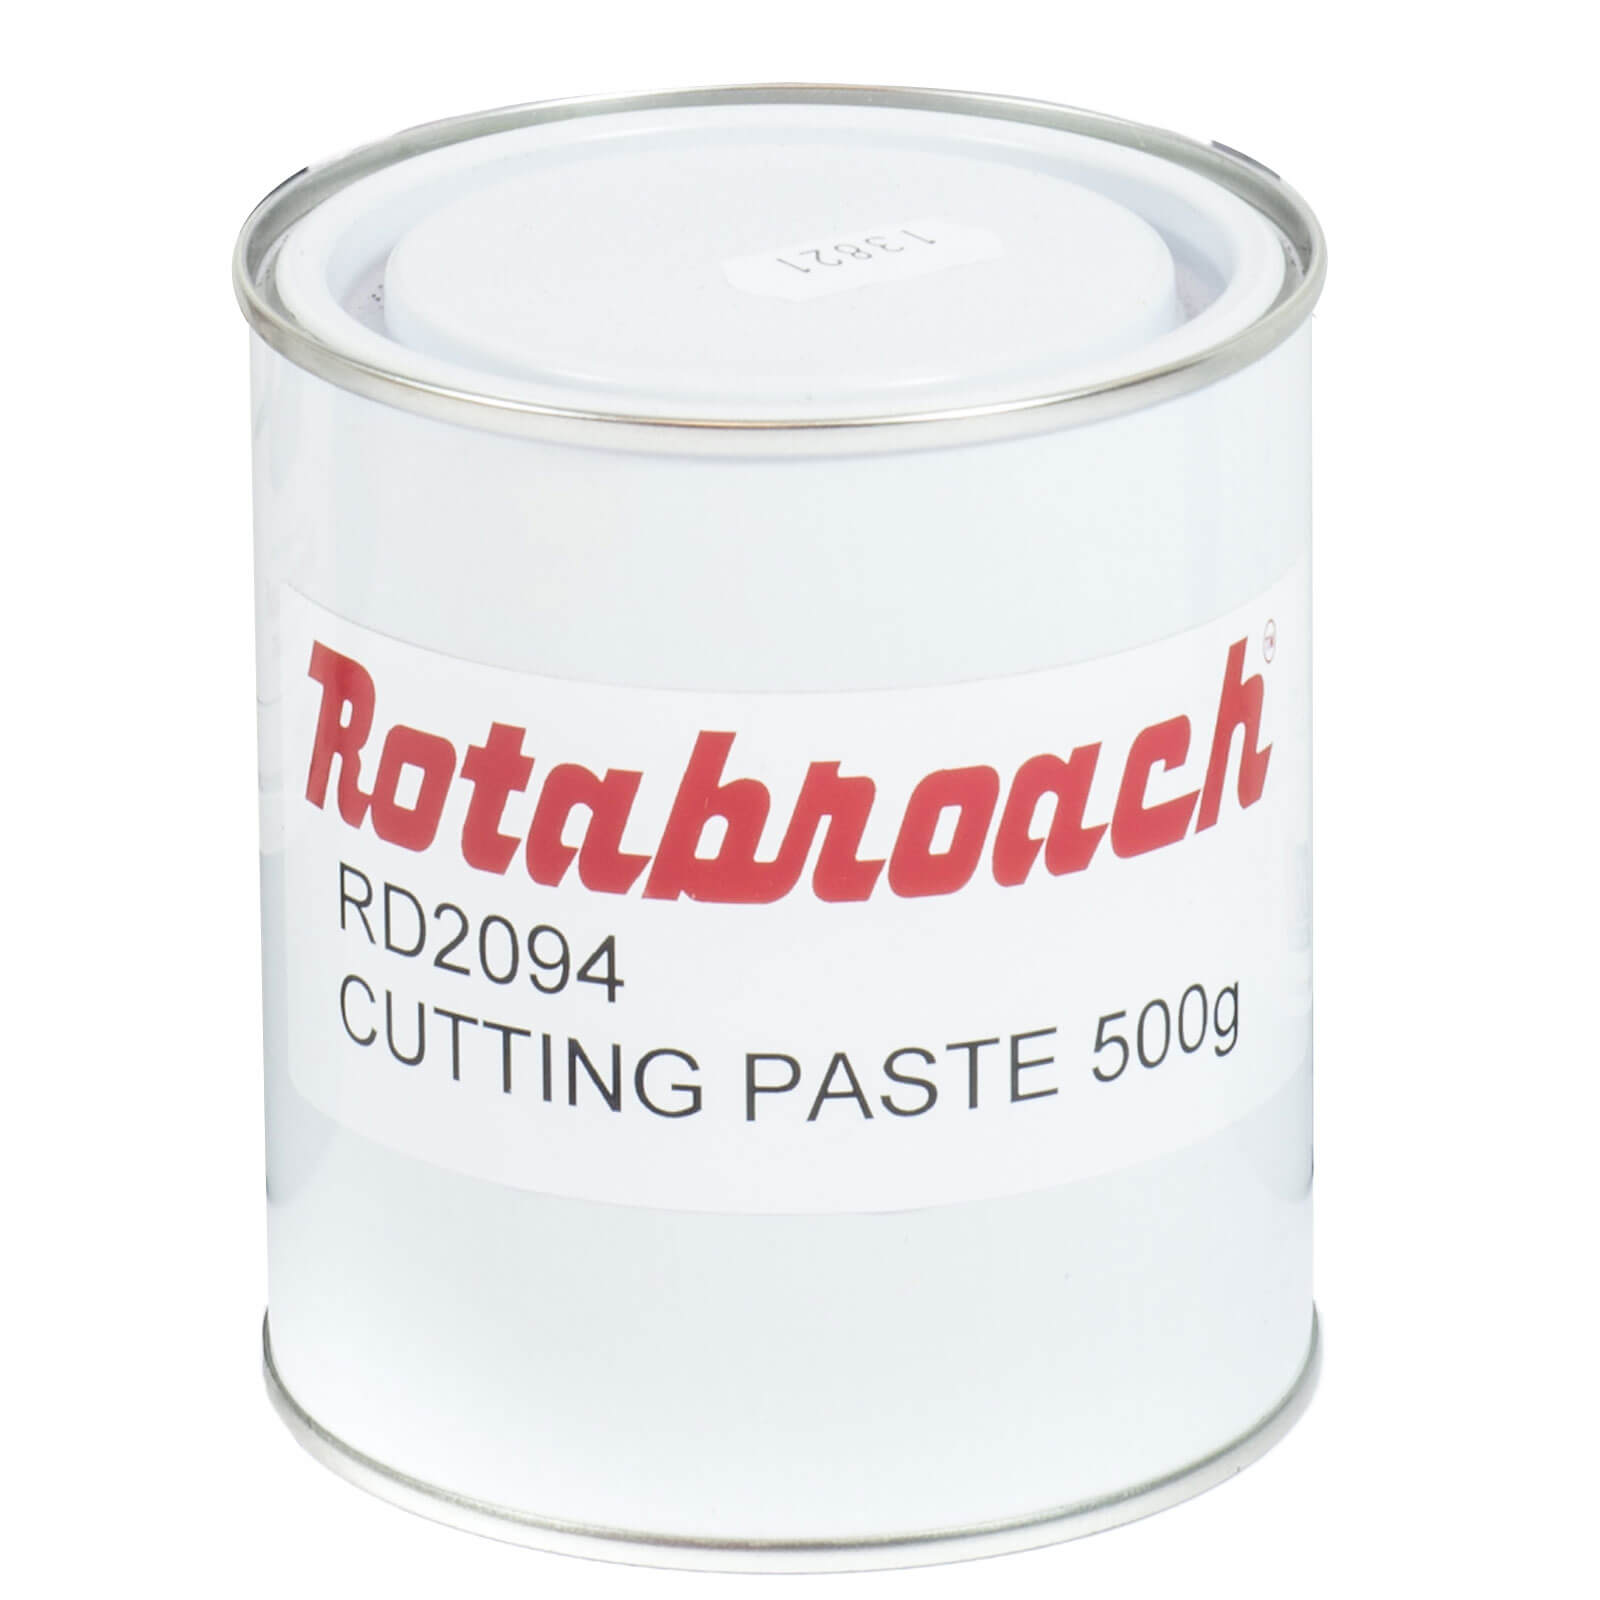 Photo of Rotabroach Mag Drill Cutting Paste 500g